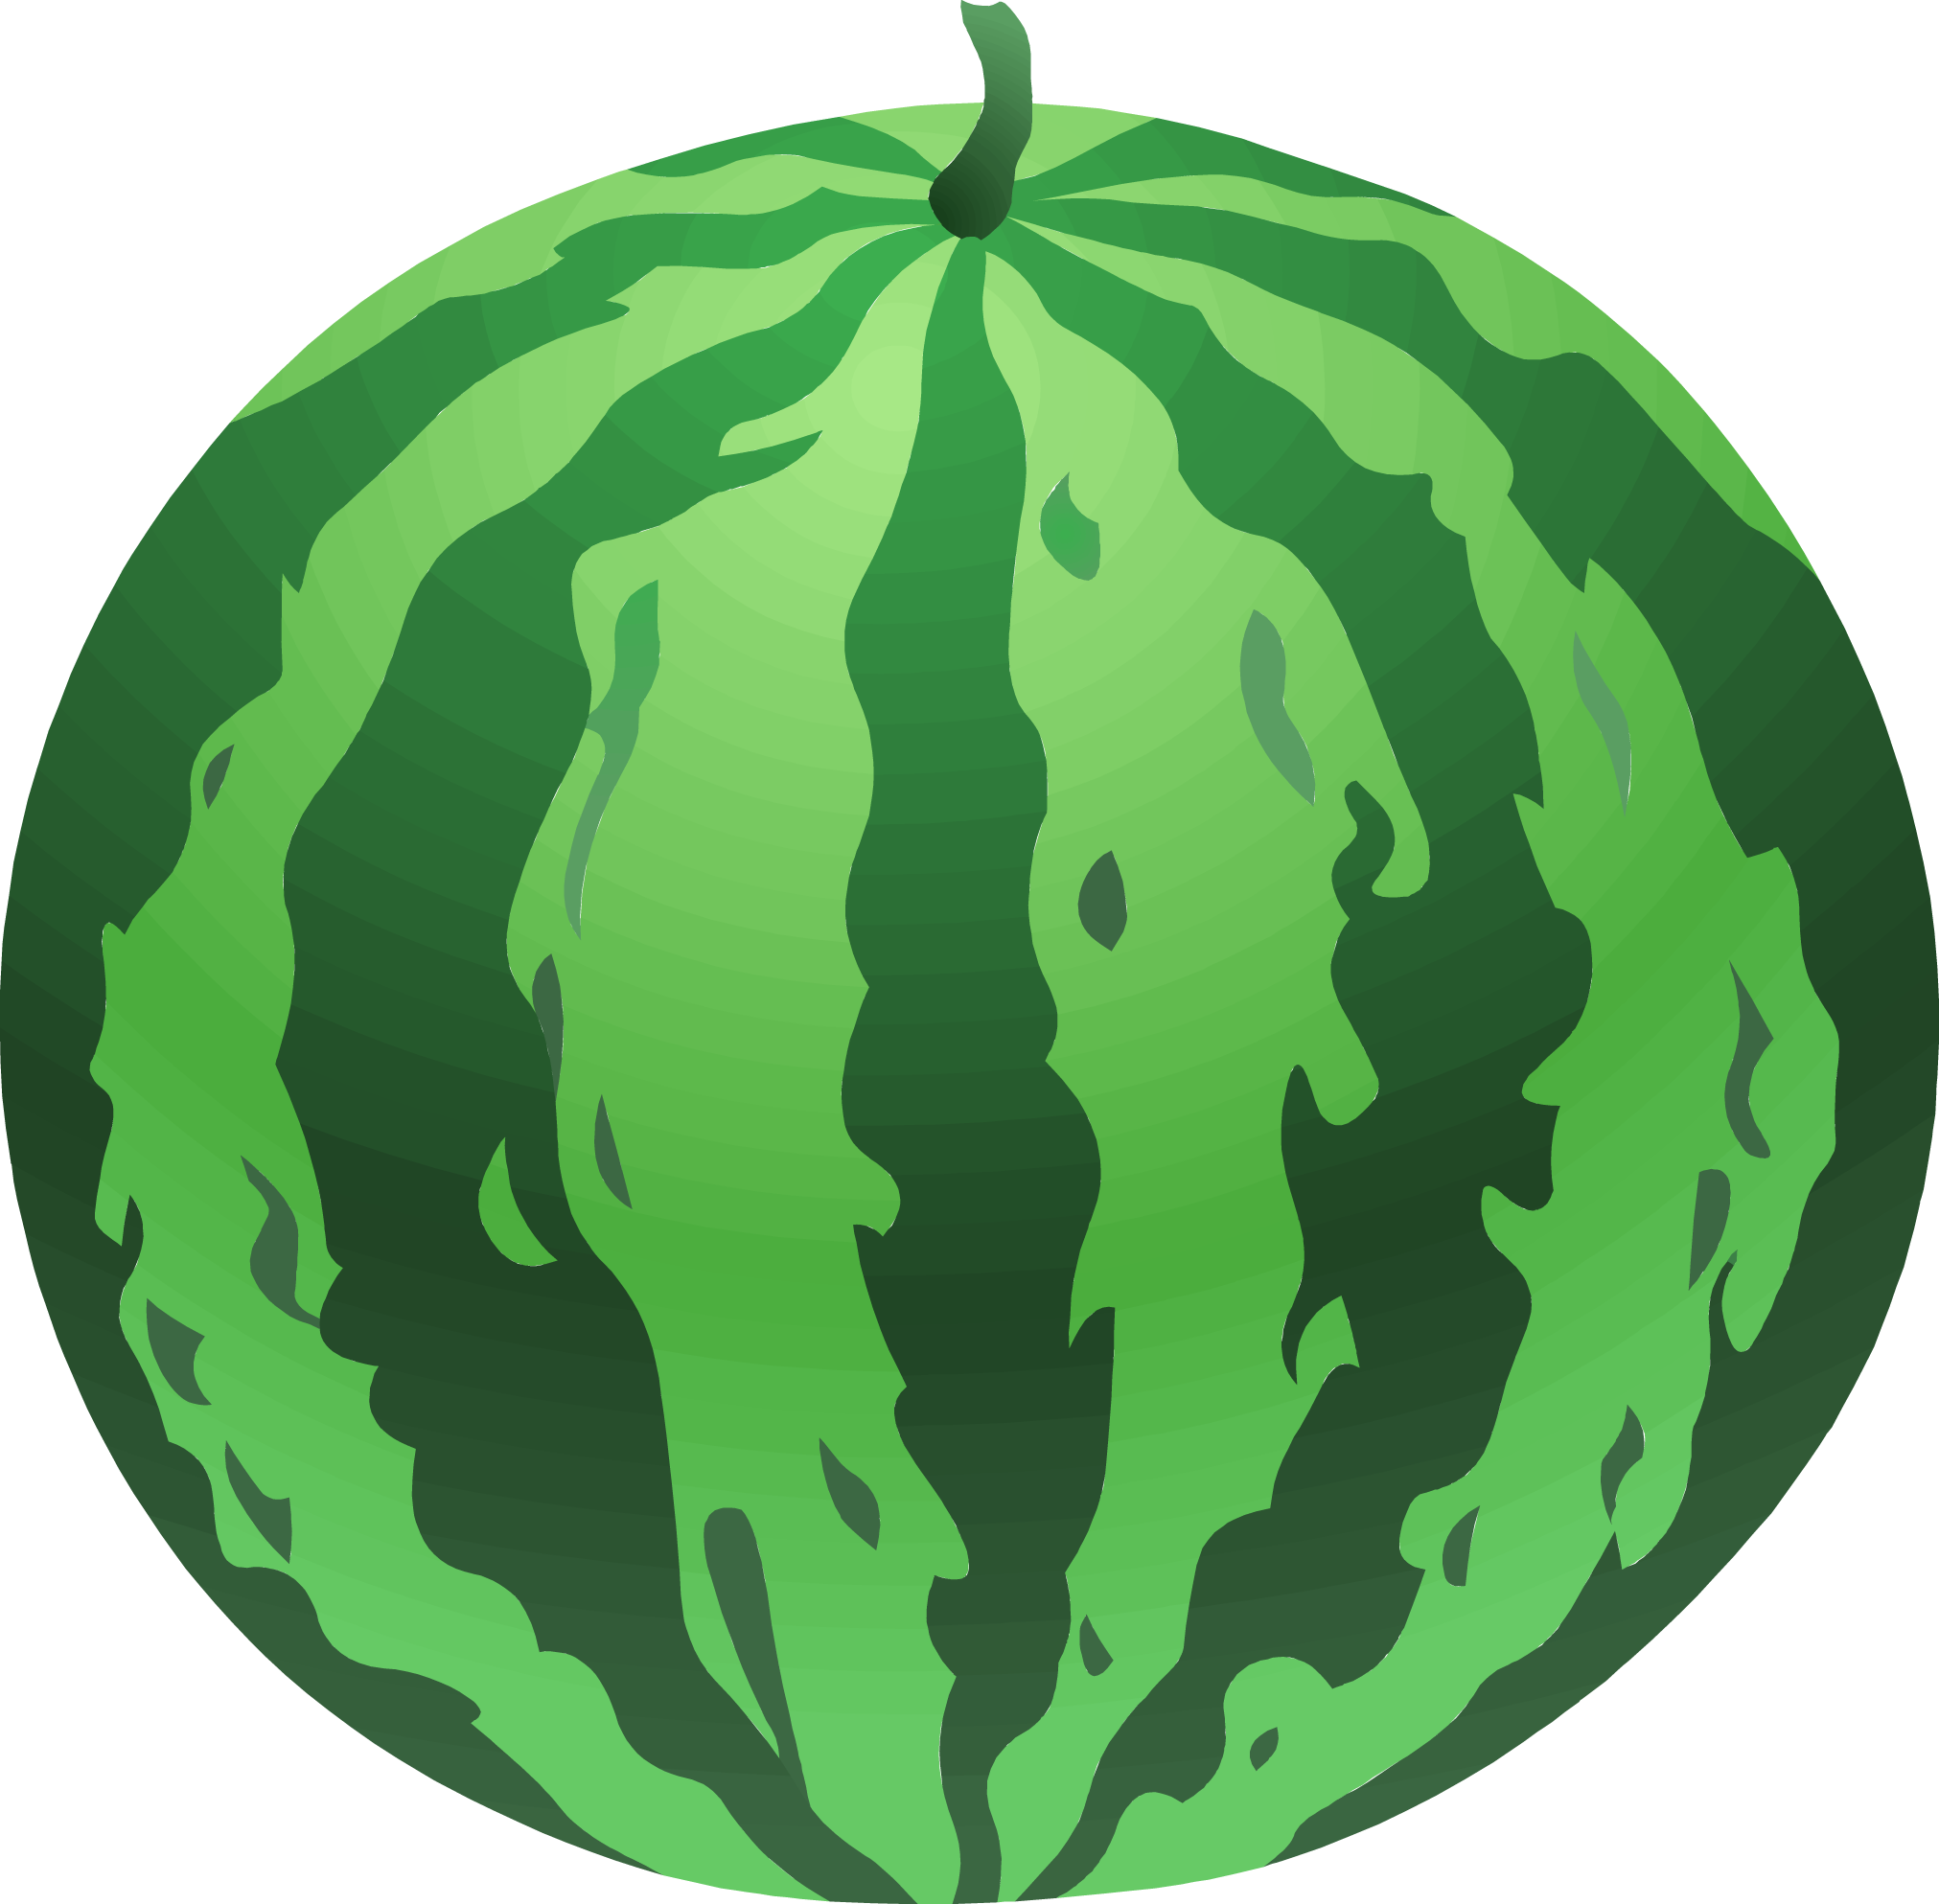 Watermelon images free download clip art